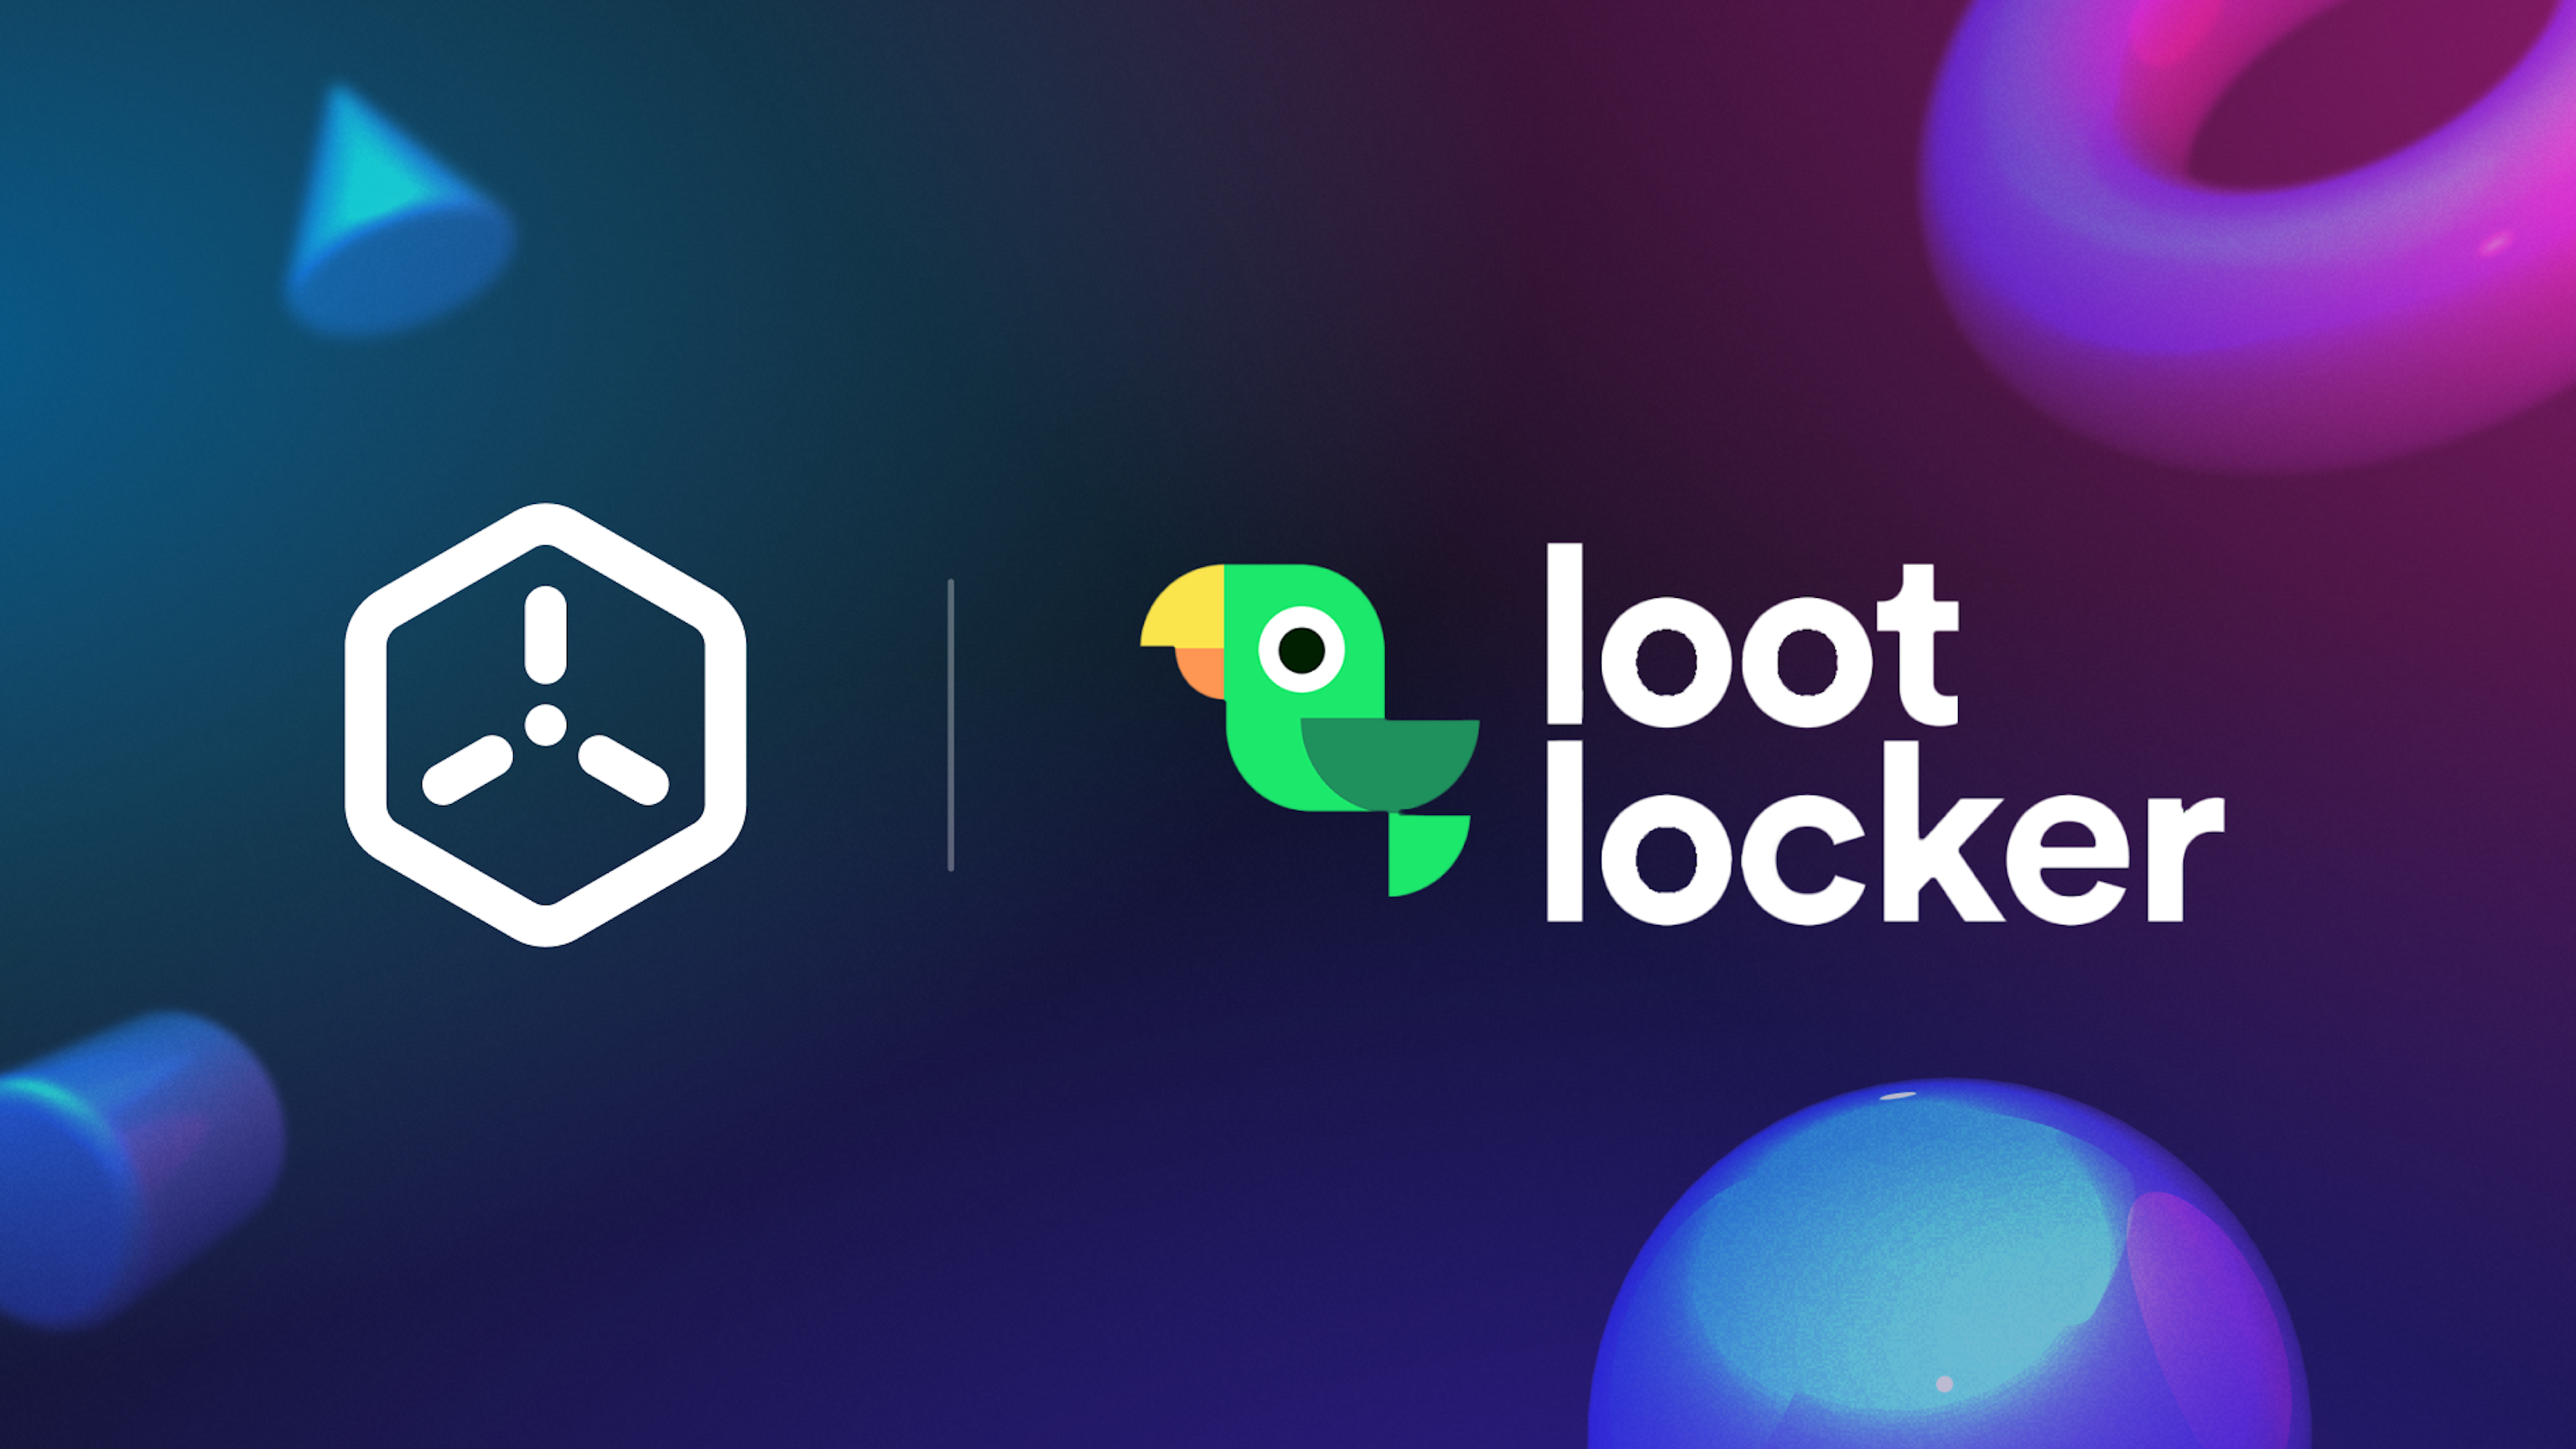 Empowering the Metagame: How LootLocker Supports Sceneri's Vision